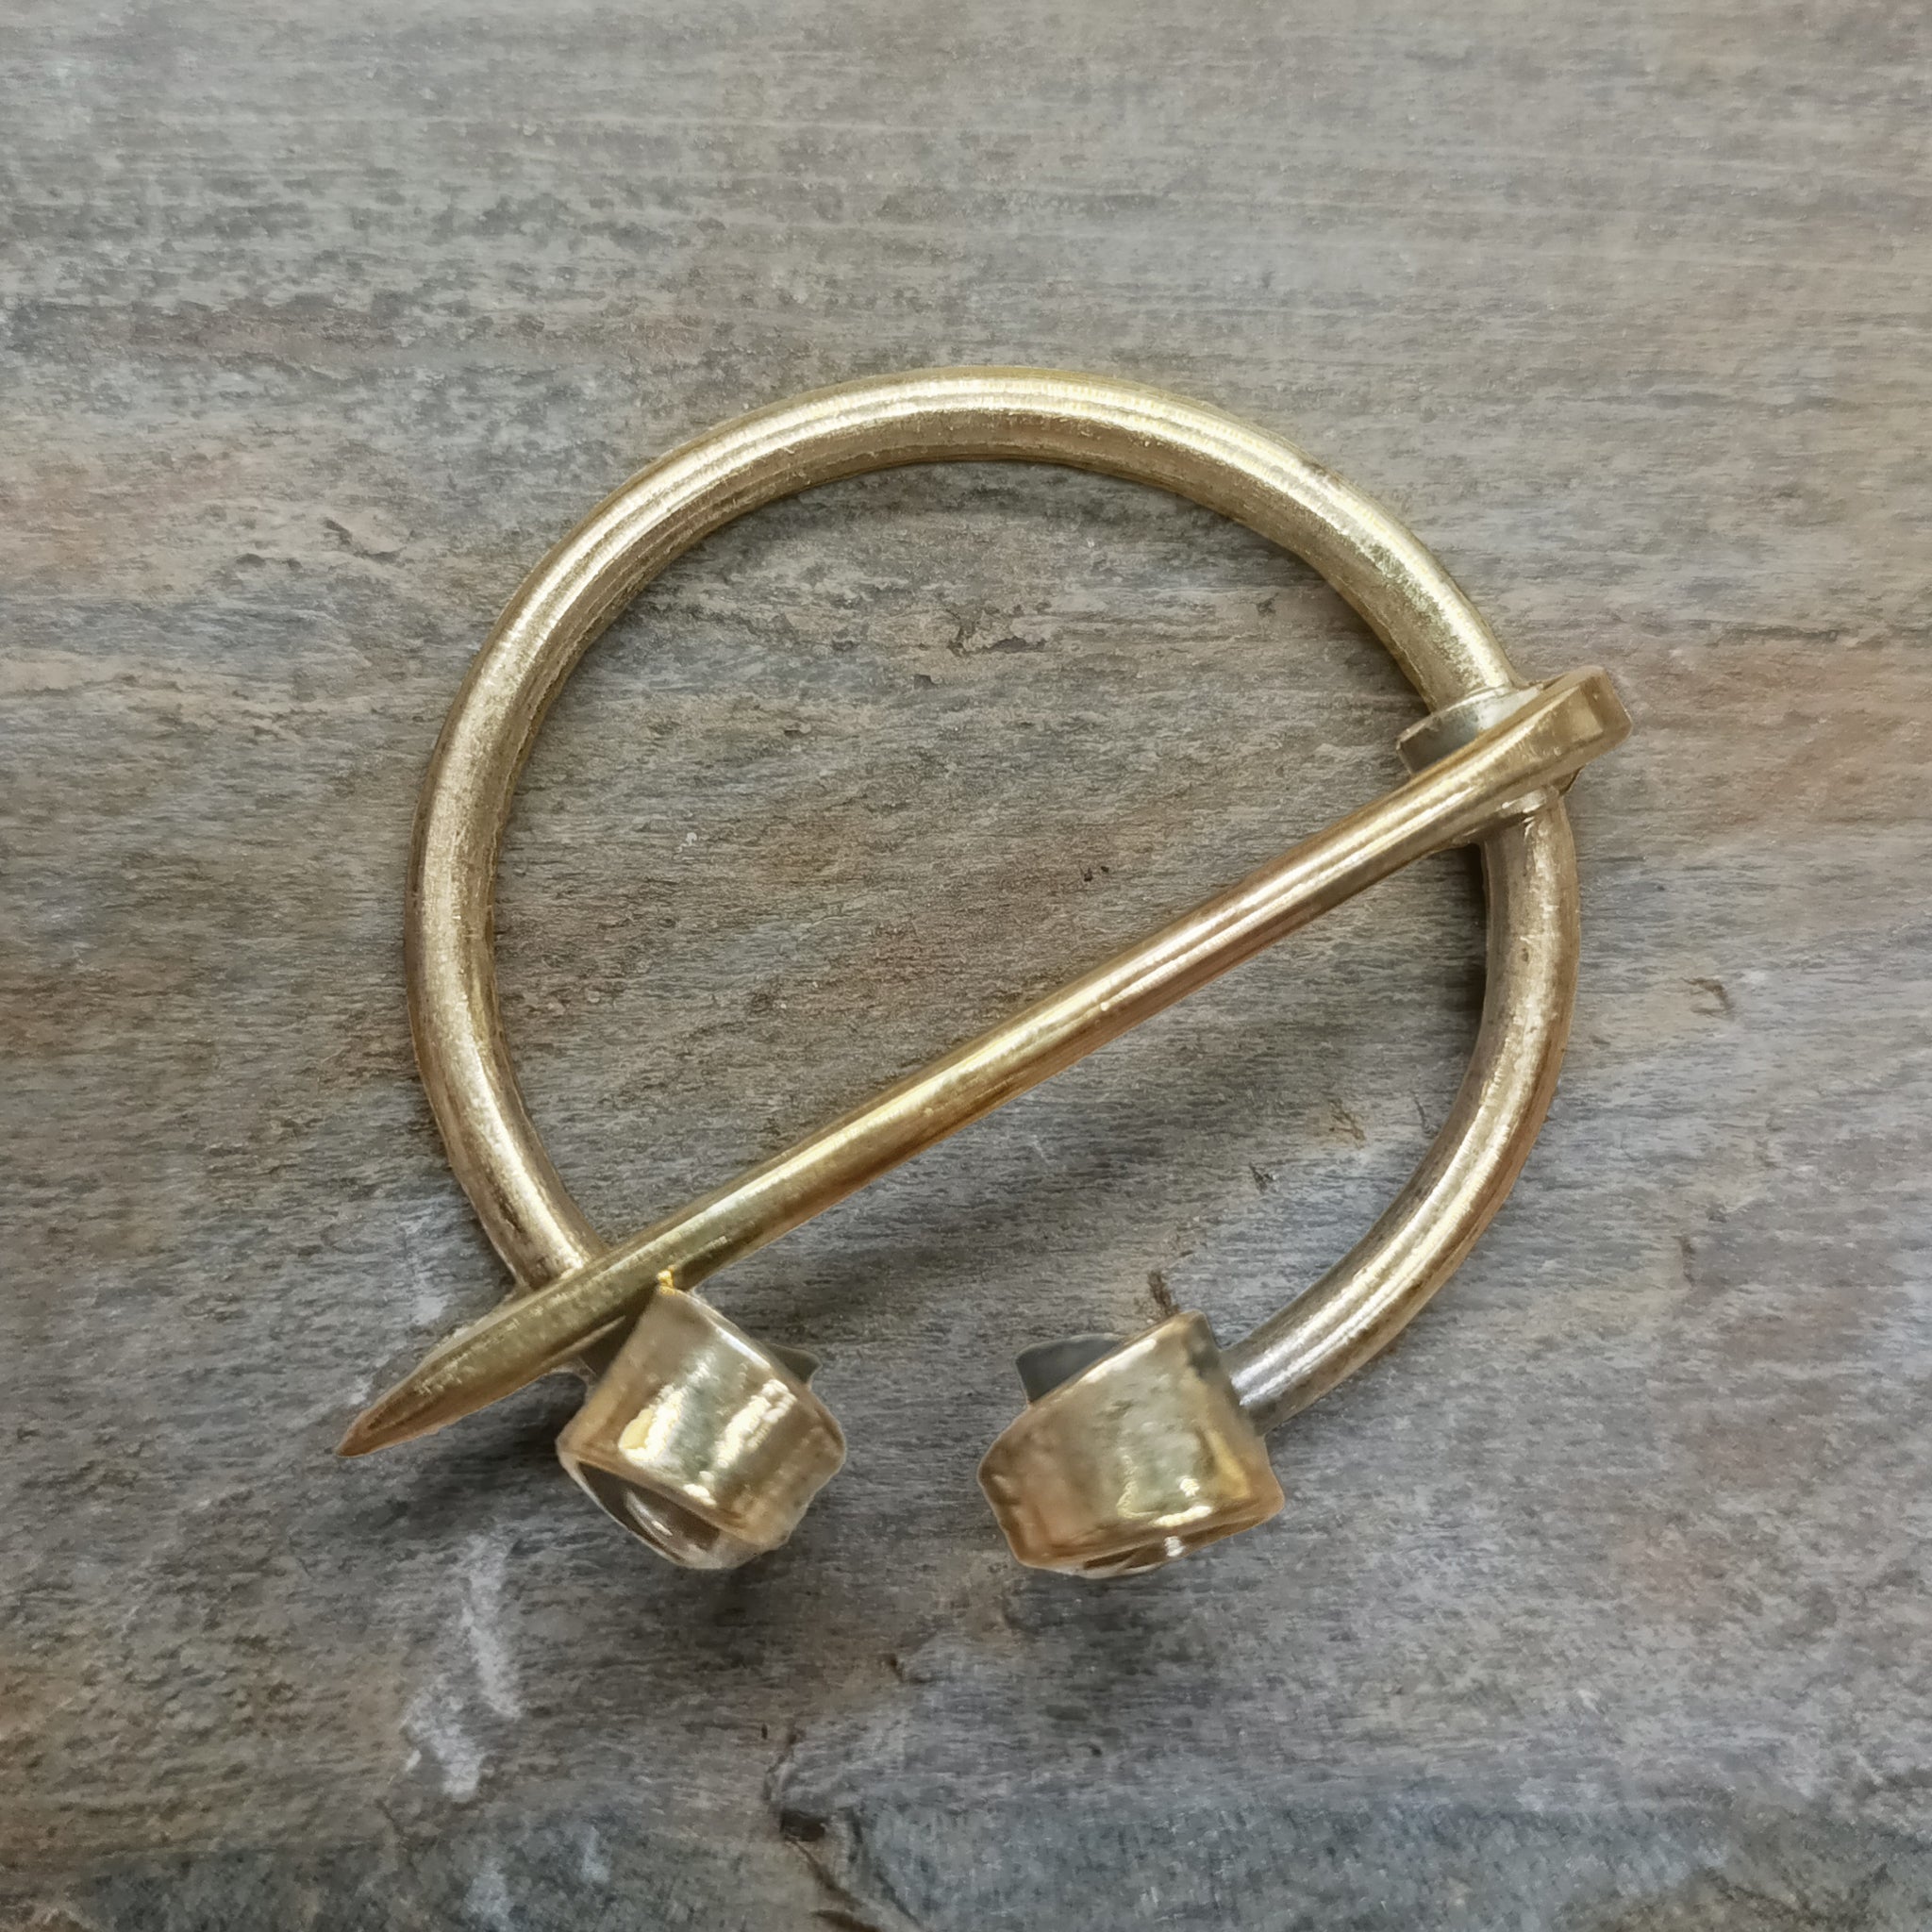 40mm Brass Cloak Pin / Clothes Pin on Rock